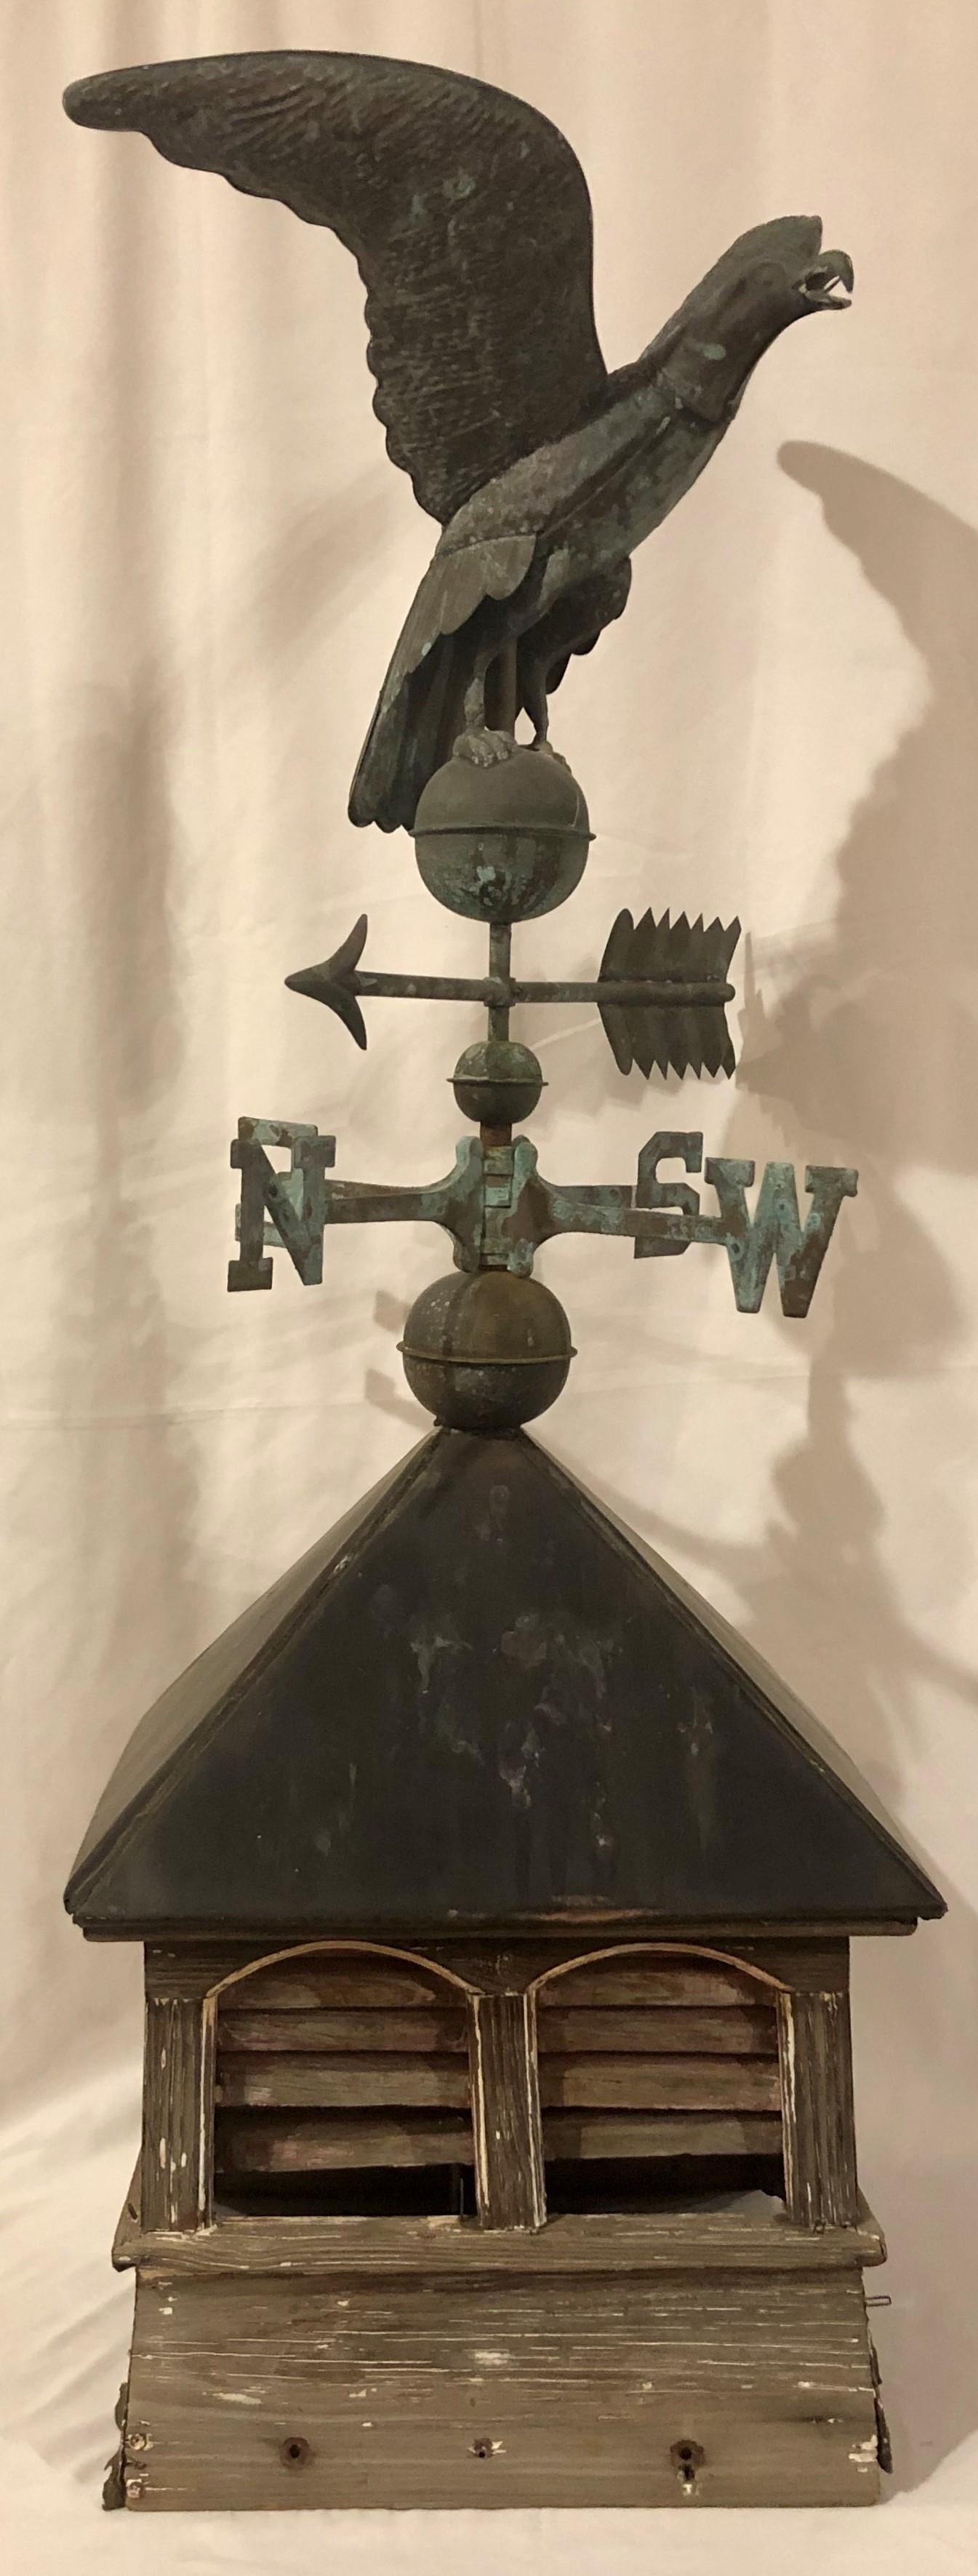 Antique American weather vane and cupola
AAM001.